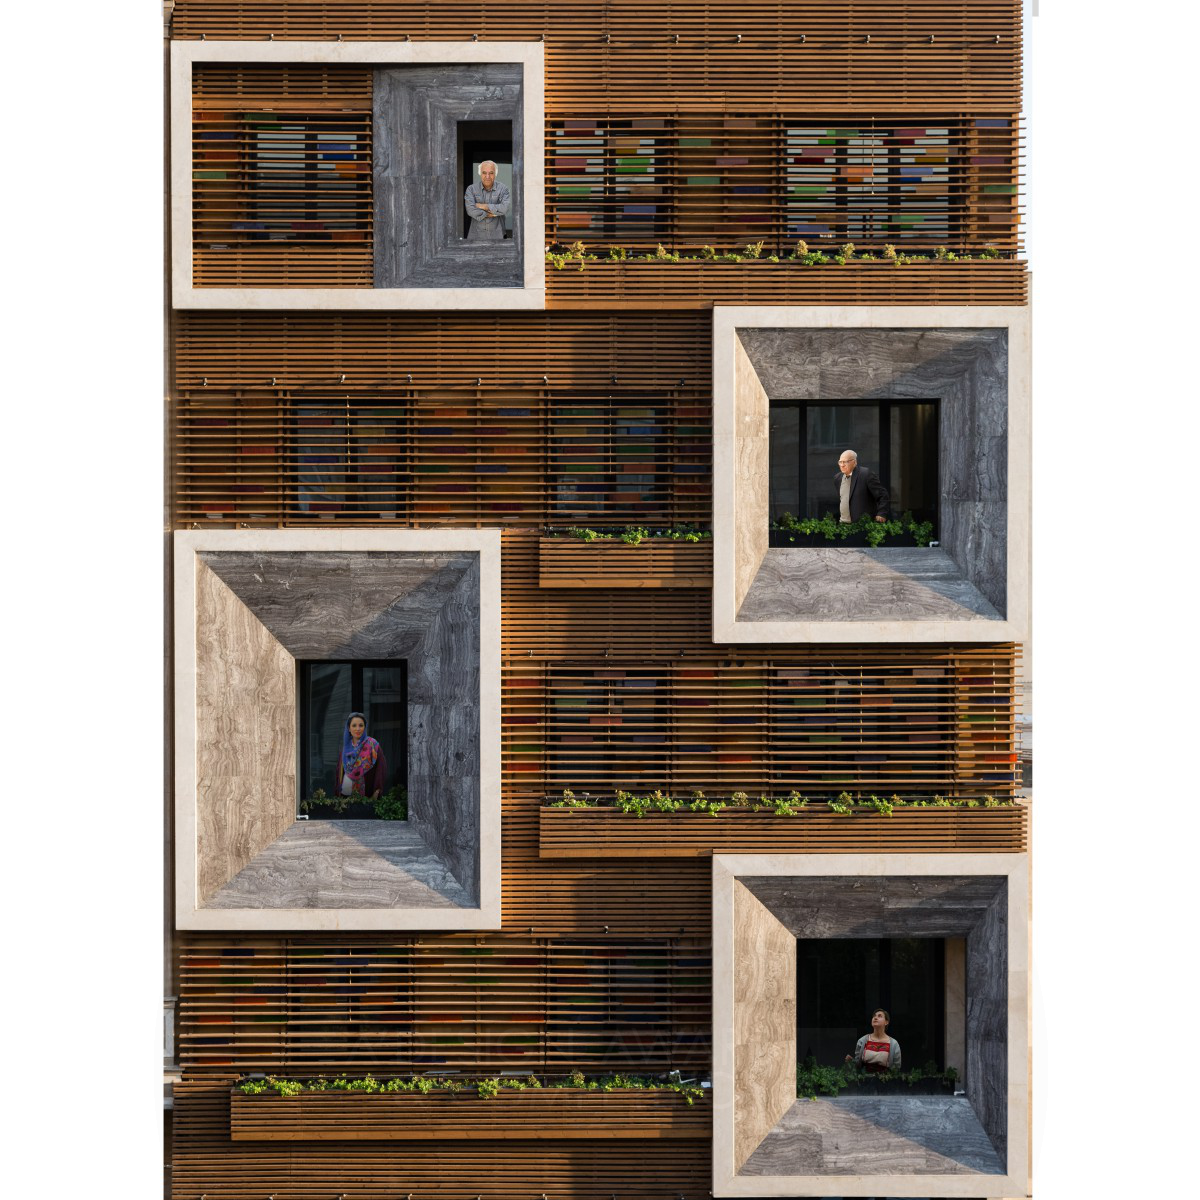 Orsi Khaneh  Residential Apartment by Keivani Architects Bronze Architecture, Building and Structure Design Award Winner 2016 